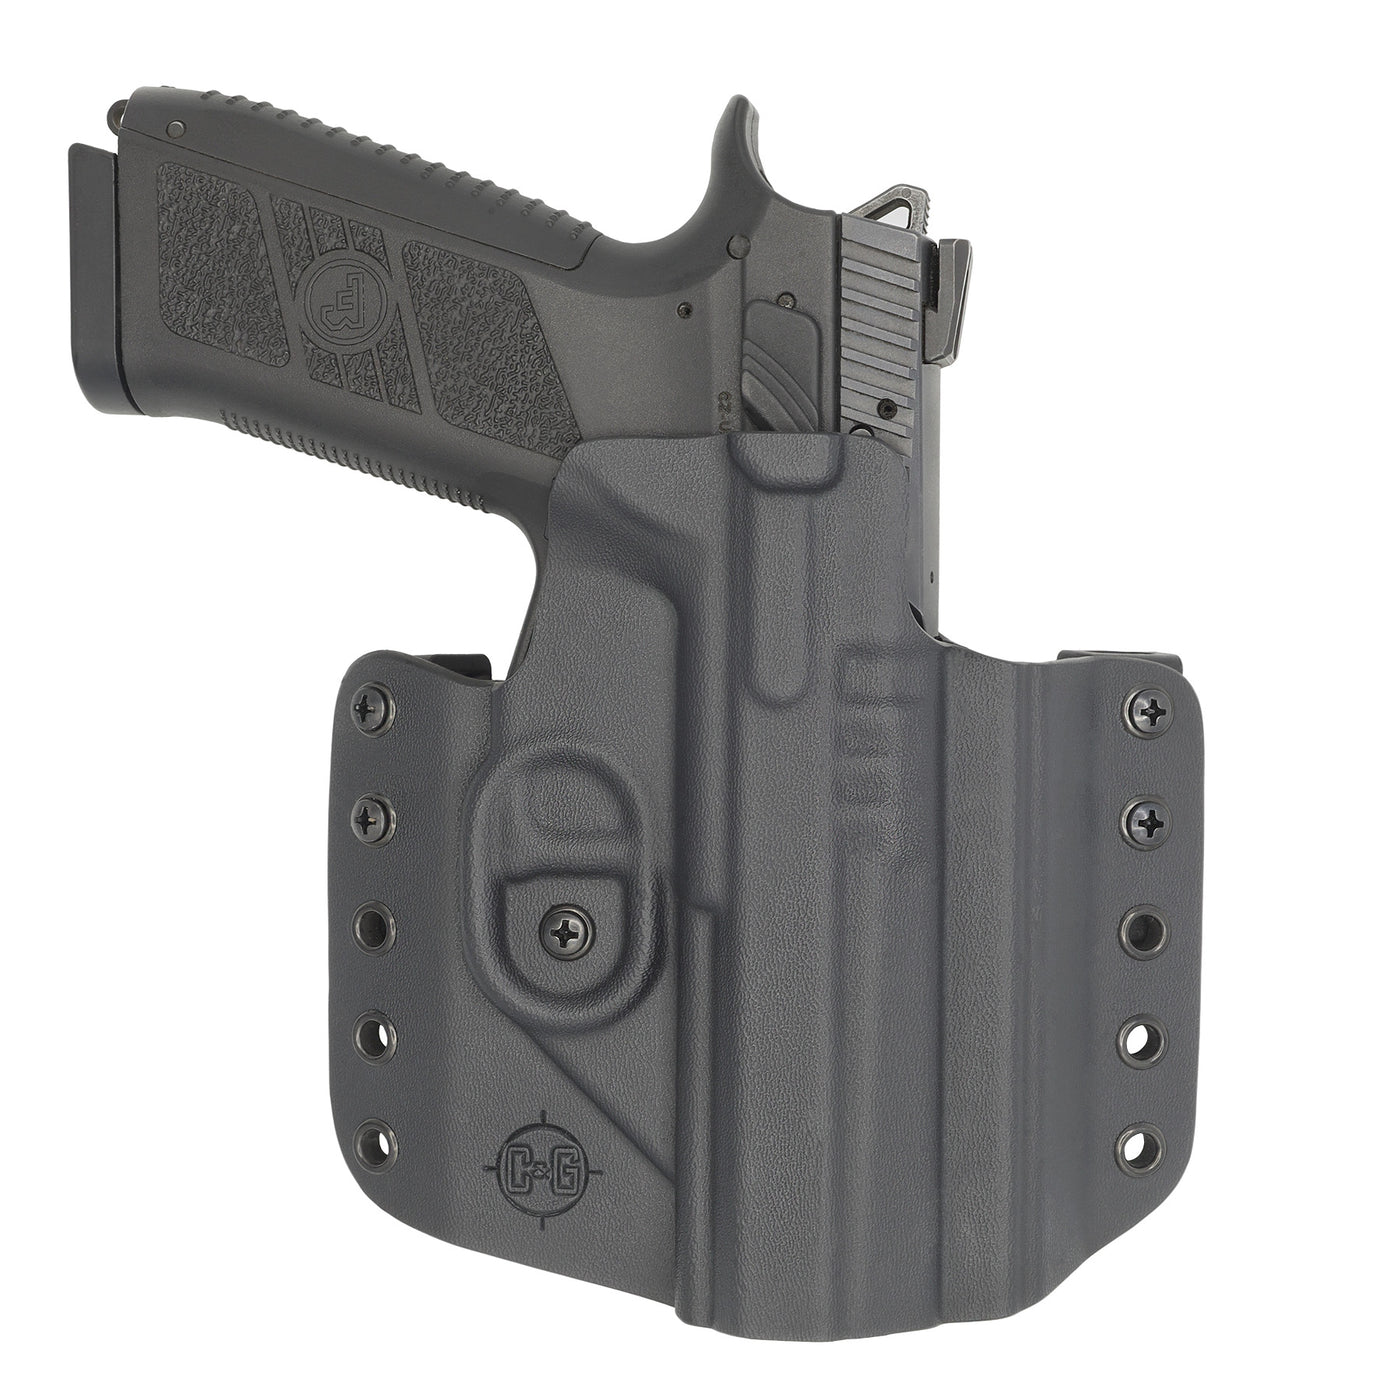 C&G Holsters Quickship OWB Covert CZ P09 in holstered position